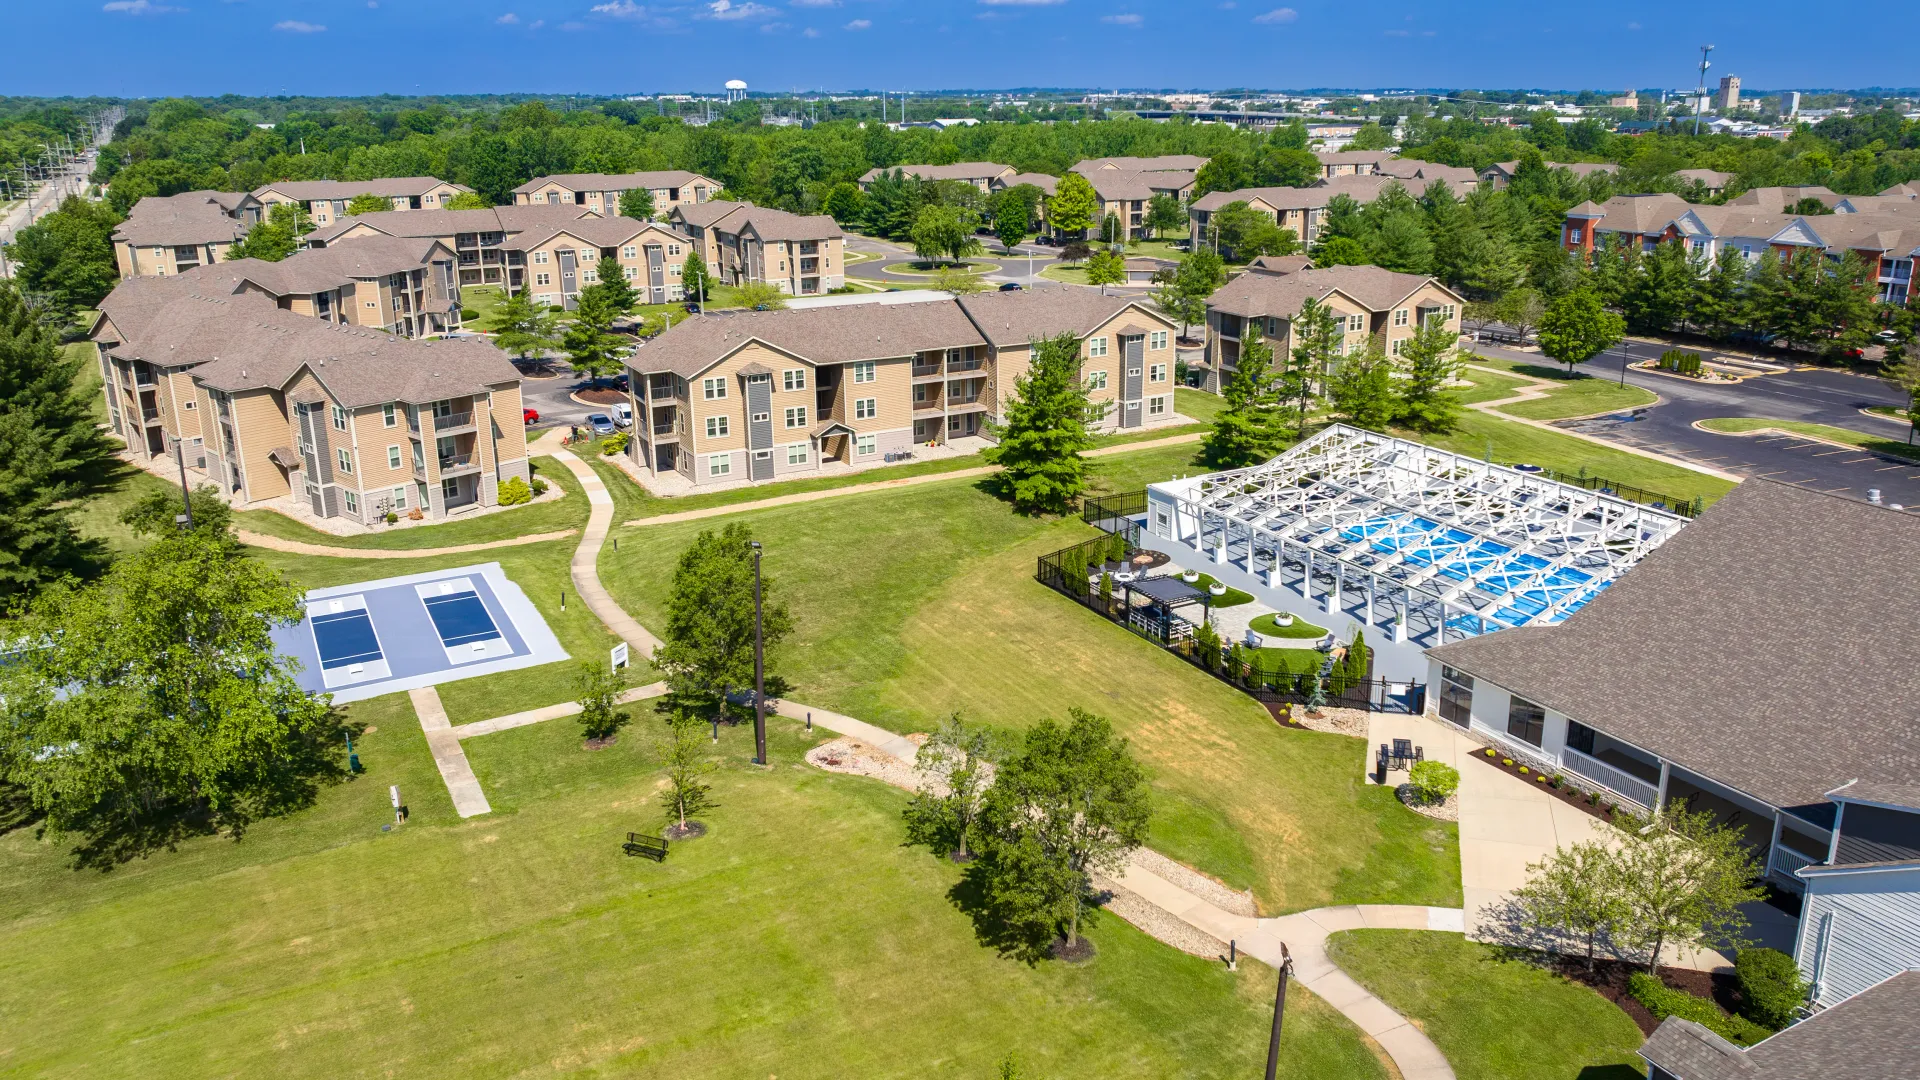 Aerial view of The LINC Apartments community in Urbana, IL, showcasing the apartment buildings, pickleball courts, swimming pool area, and lush green surroundings.